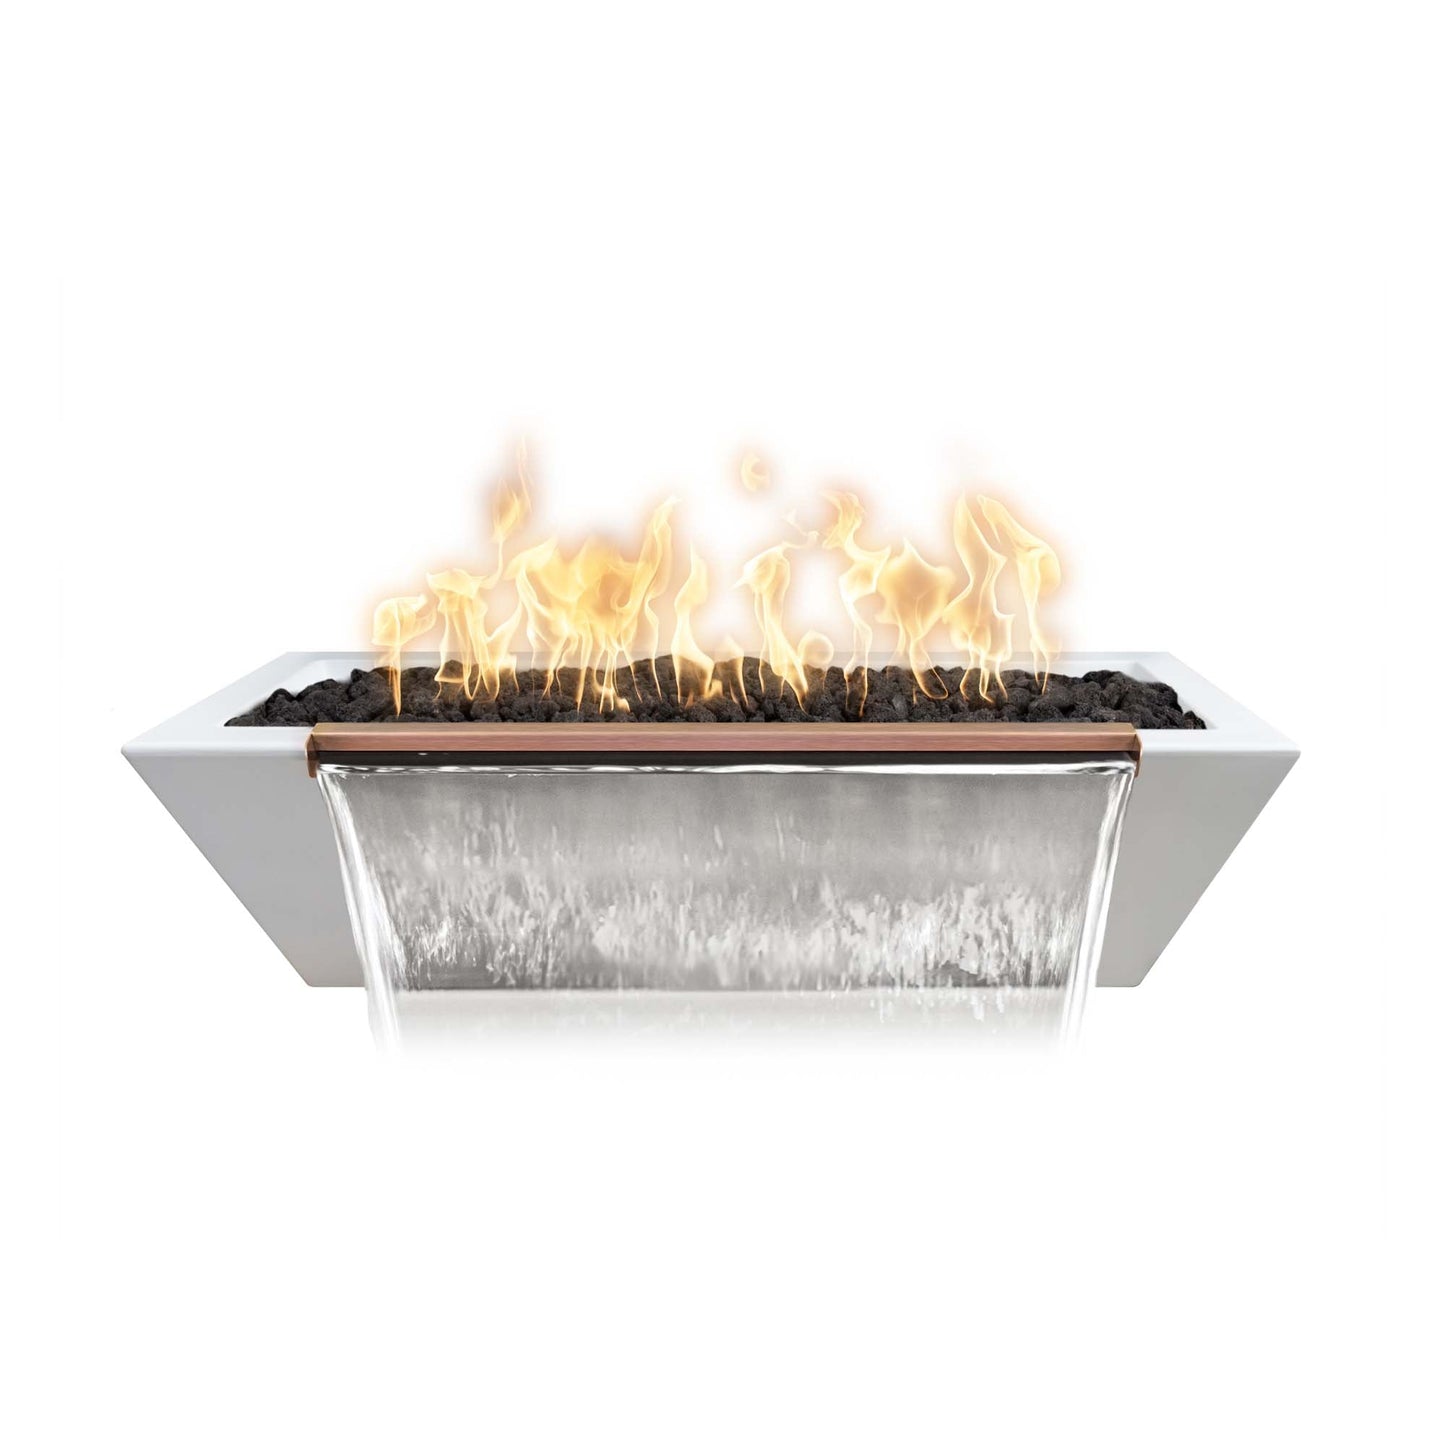 The Outdoor Plus Linear Maya 60" Chestnut GFRC Concrete Liquid Propane Fire & Water Bowl with Match Lit with Flame Sense Ignition